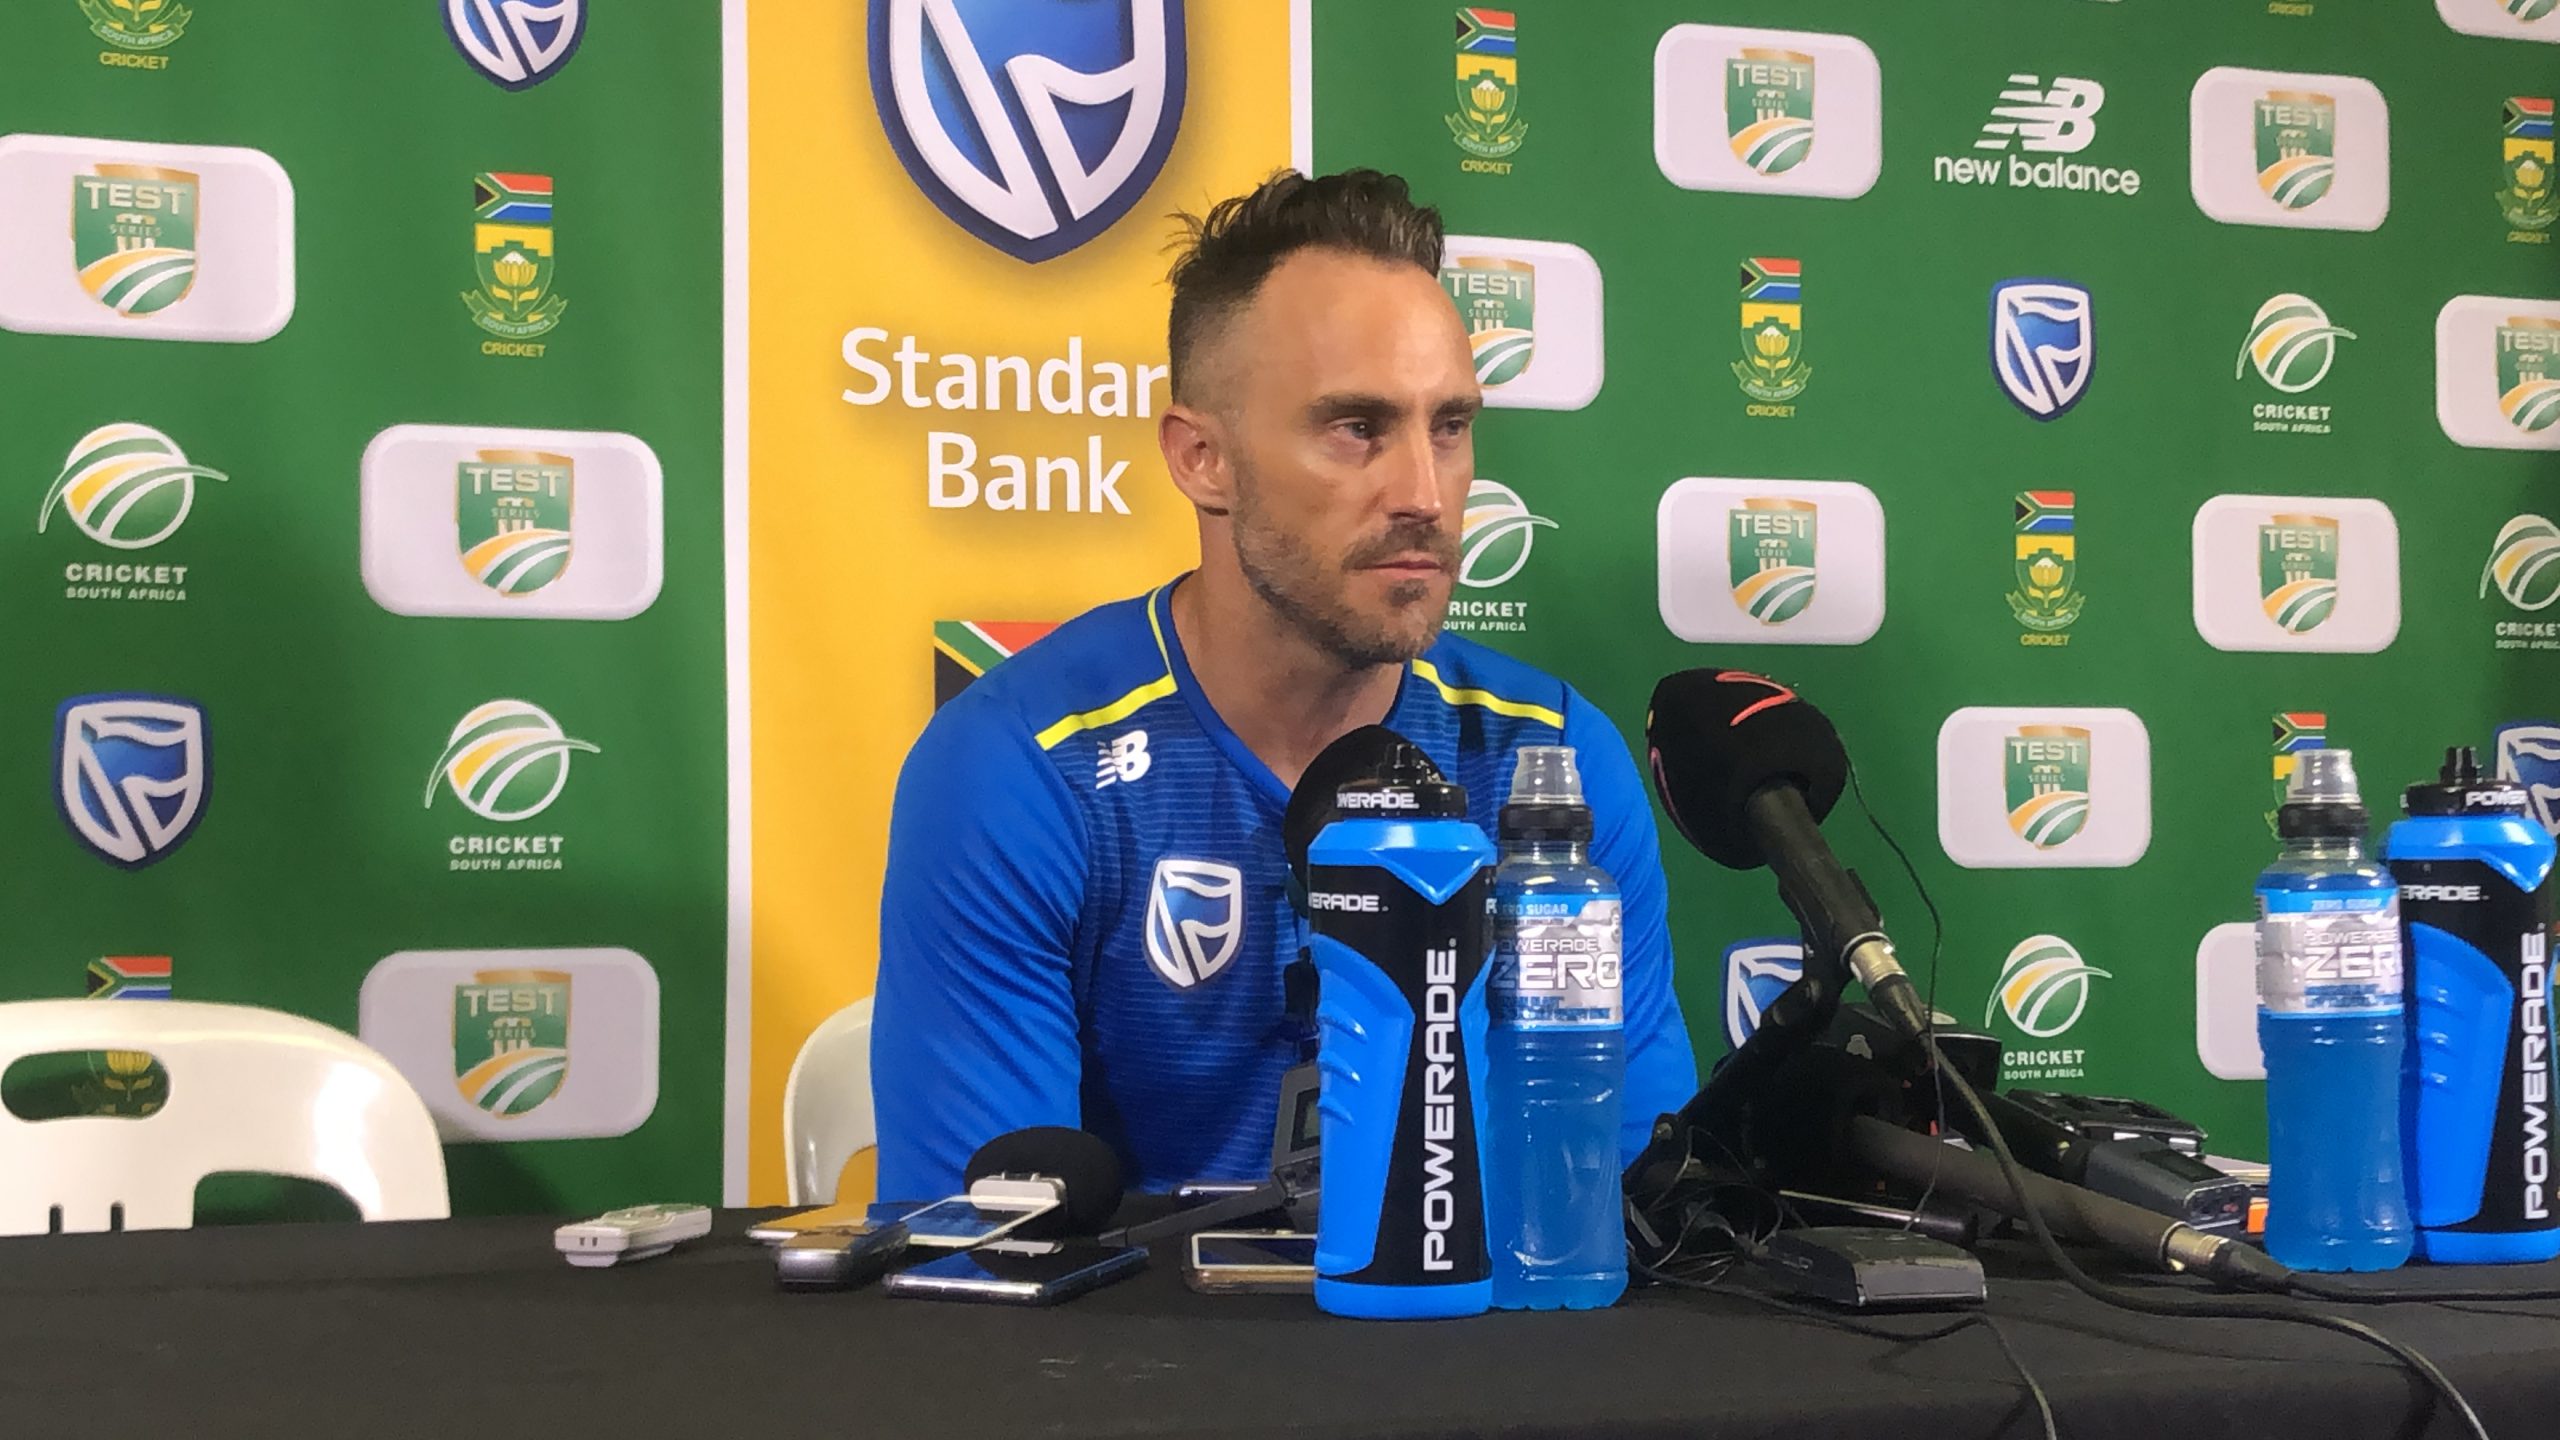 “England showed our batters how to apply ourselves” –Faf du Plessis